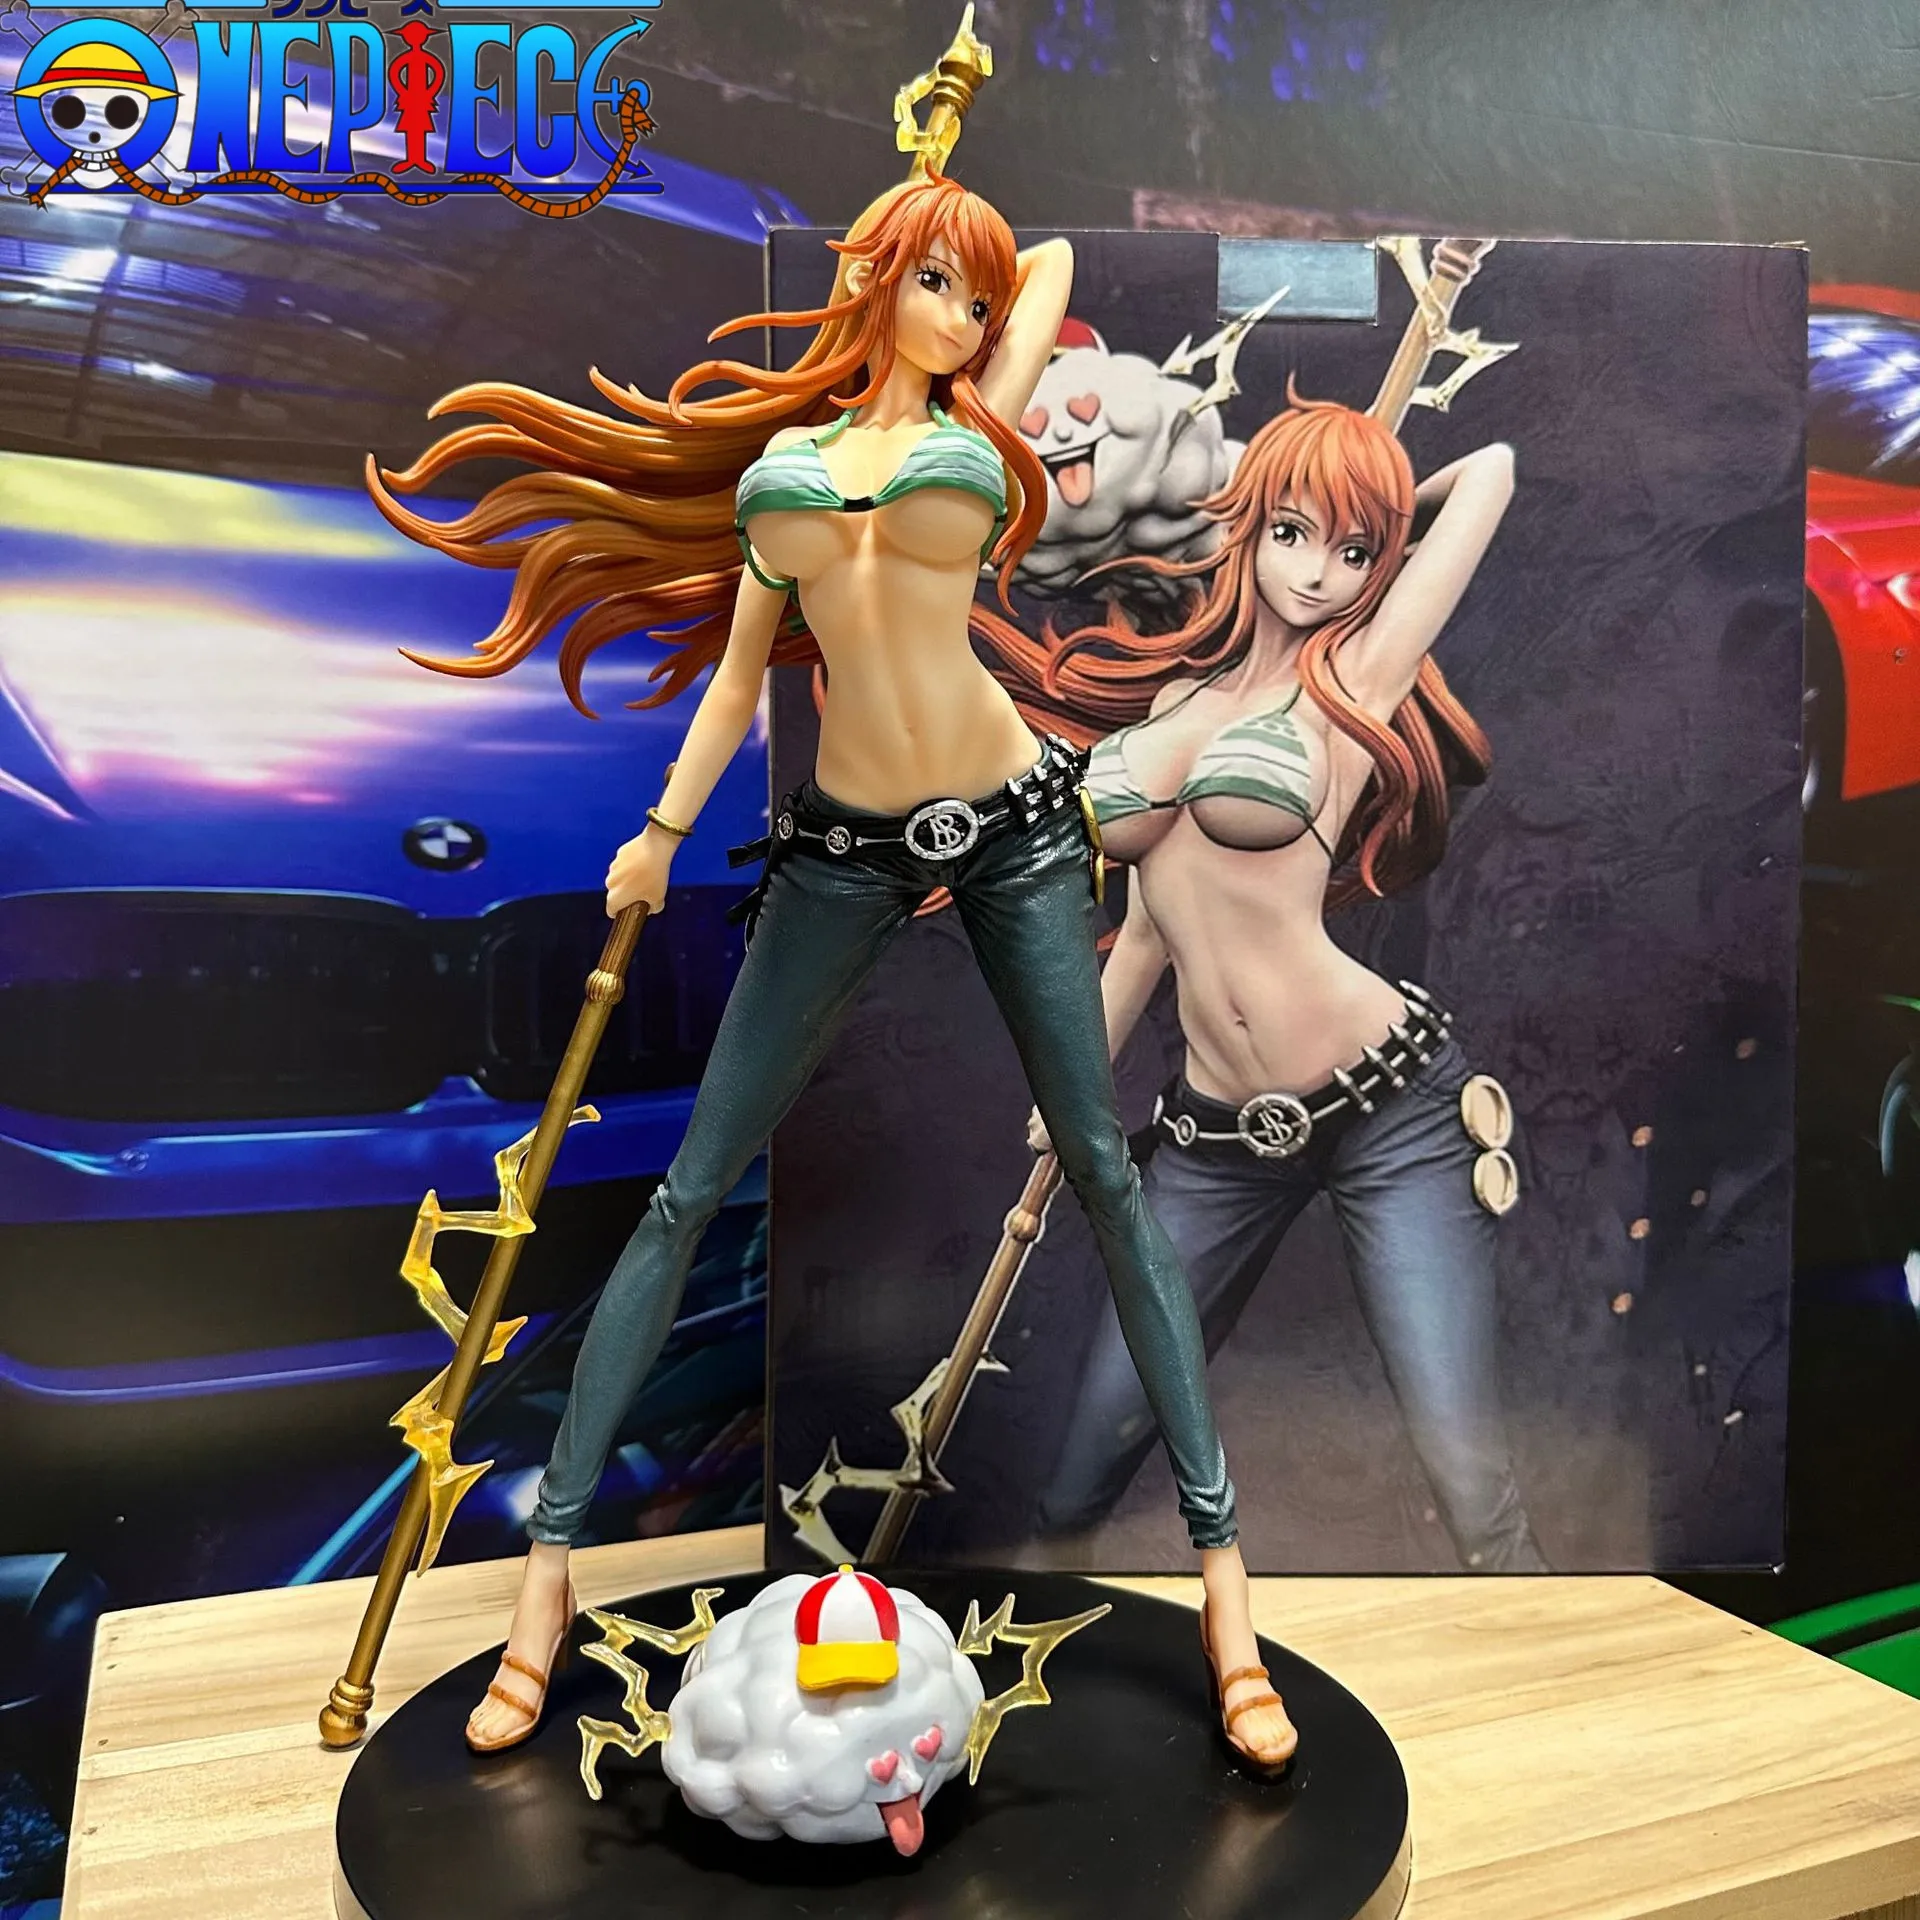 

37cm One Piece Nami Sexy Figure Gk Hunter Fan Female Resonance Series Model Ornaments Animation Peripherals Statue Toy Gift Hf